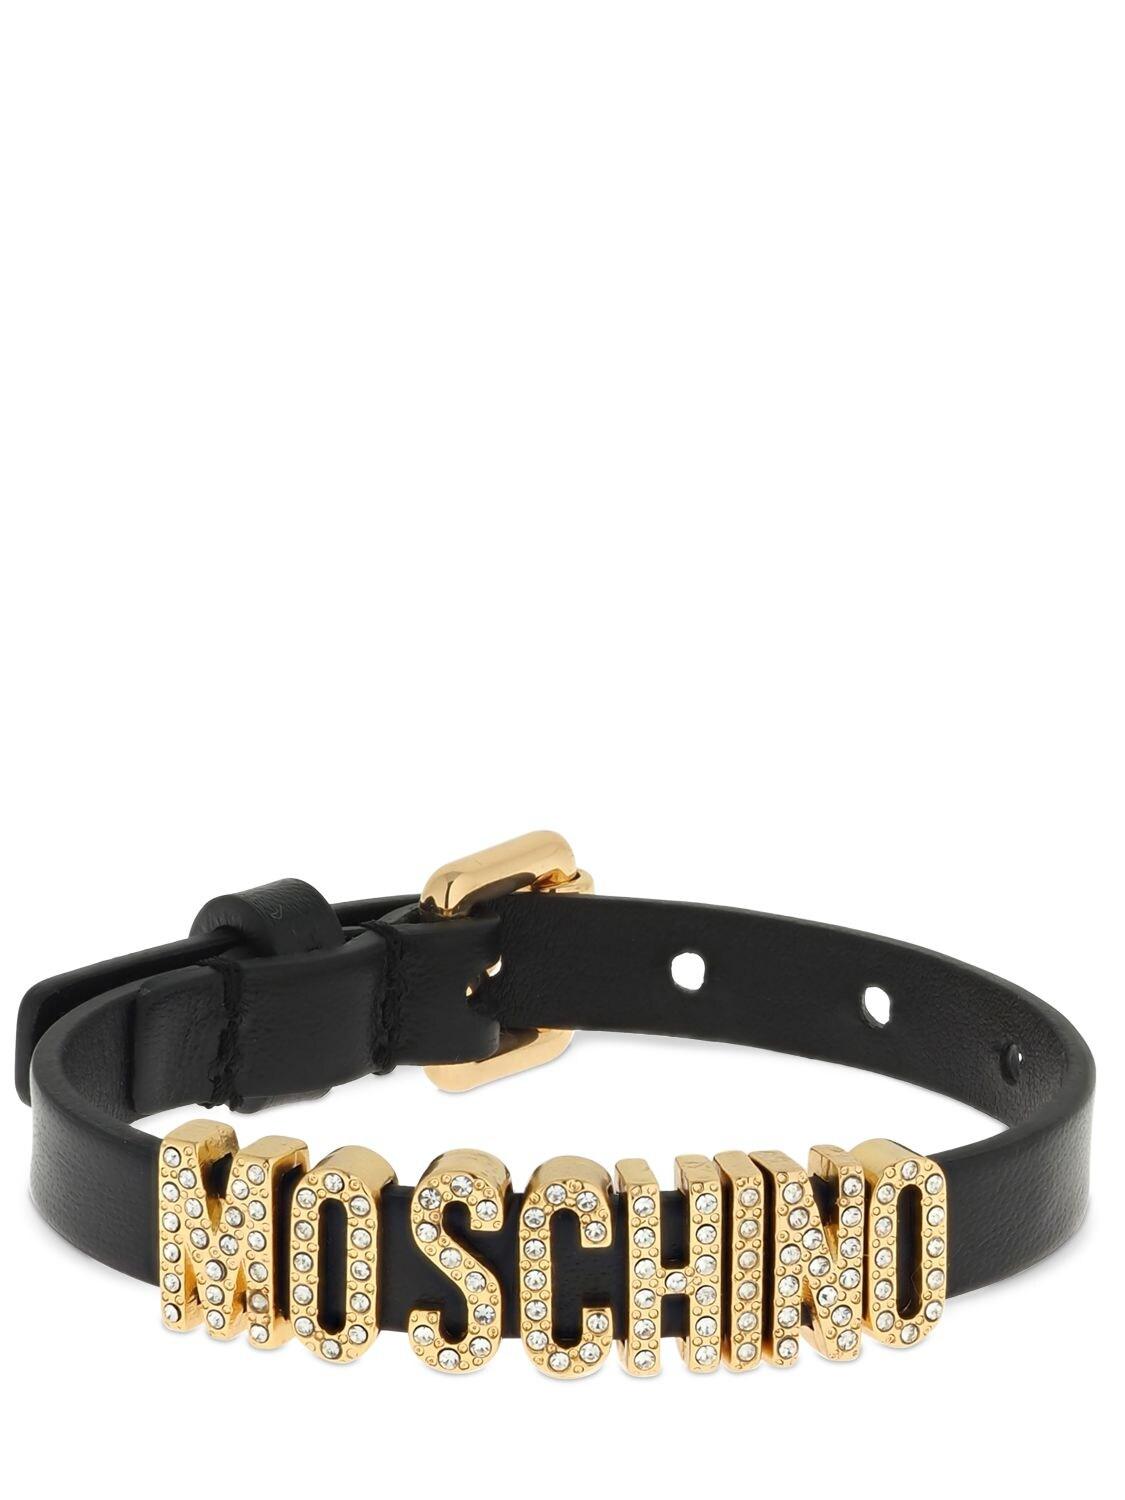 Moschino Logo Leather Bracelet W/ Crystals in Black/Gold (Black) - Lyst